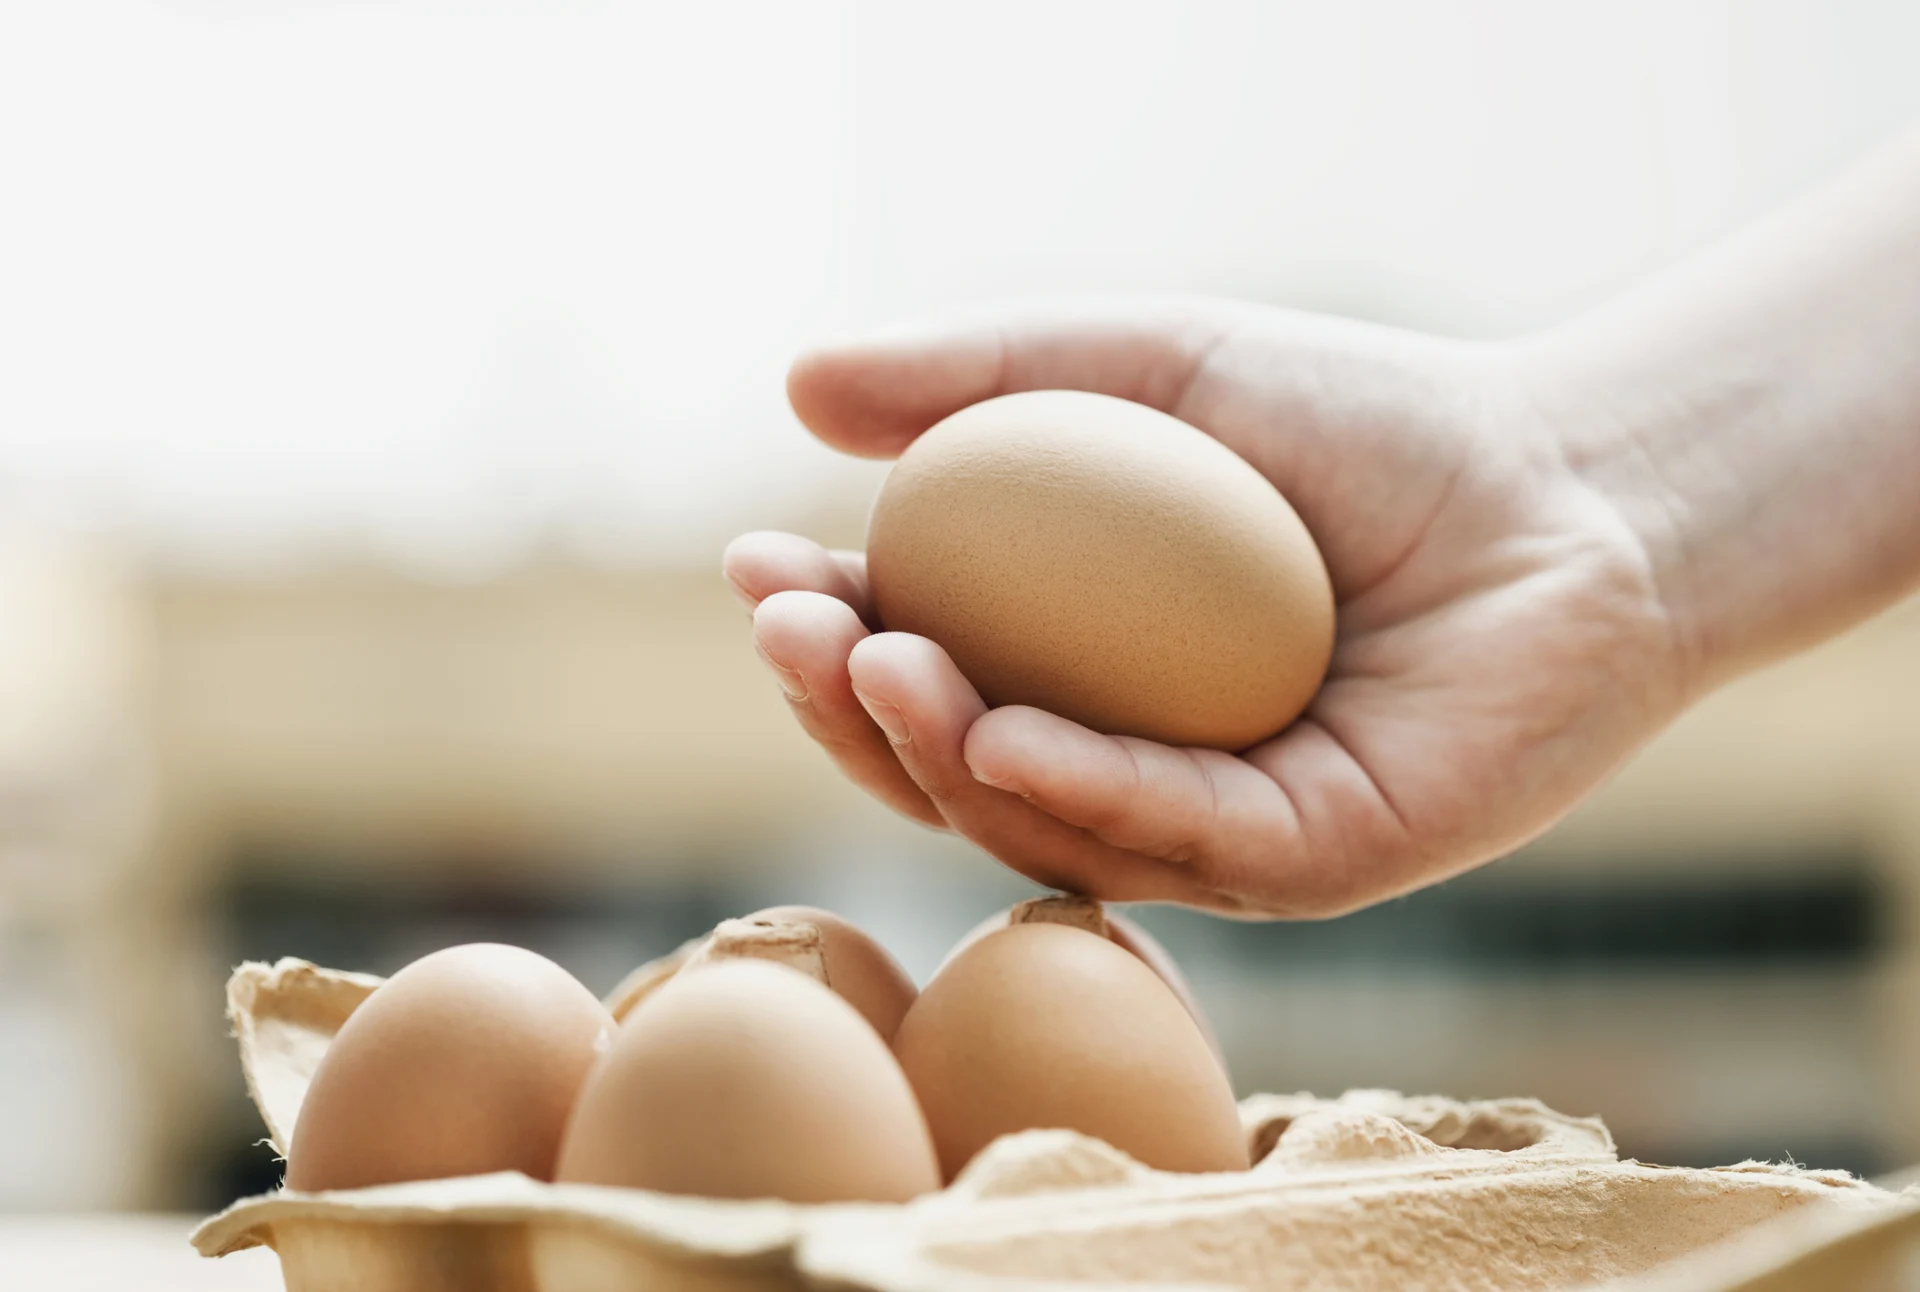 A hand gently cups a brown egg, above a box of other eggs.